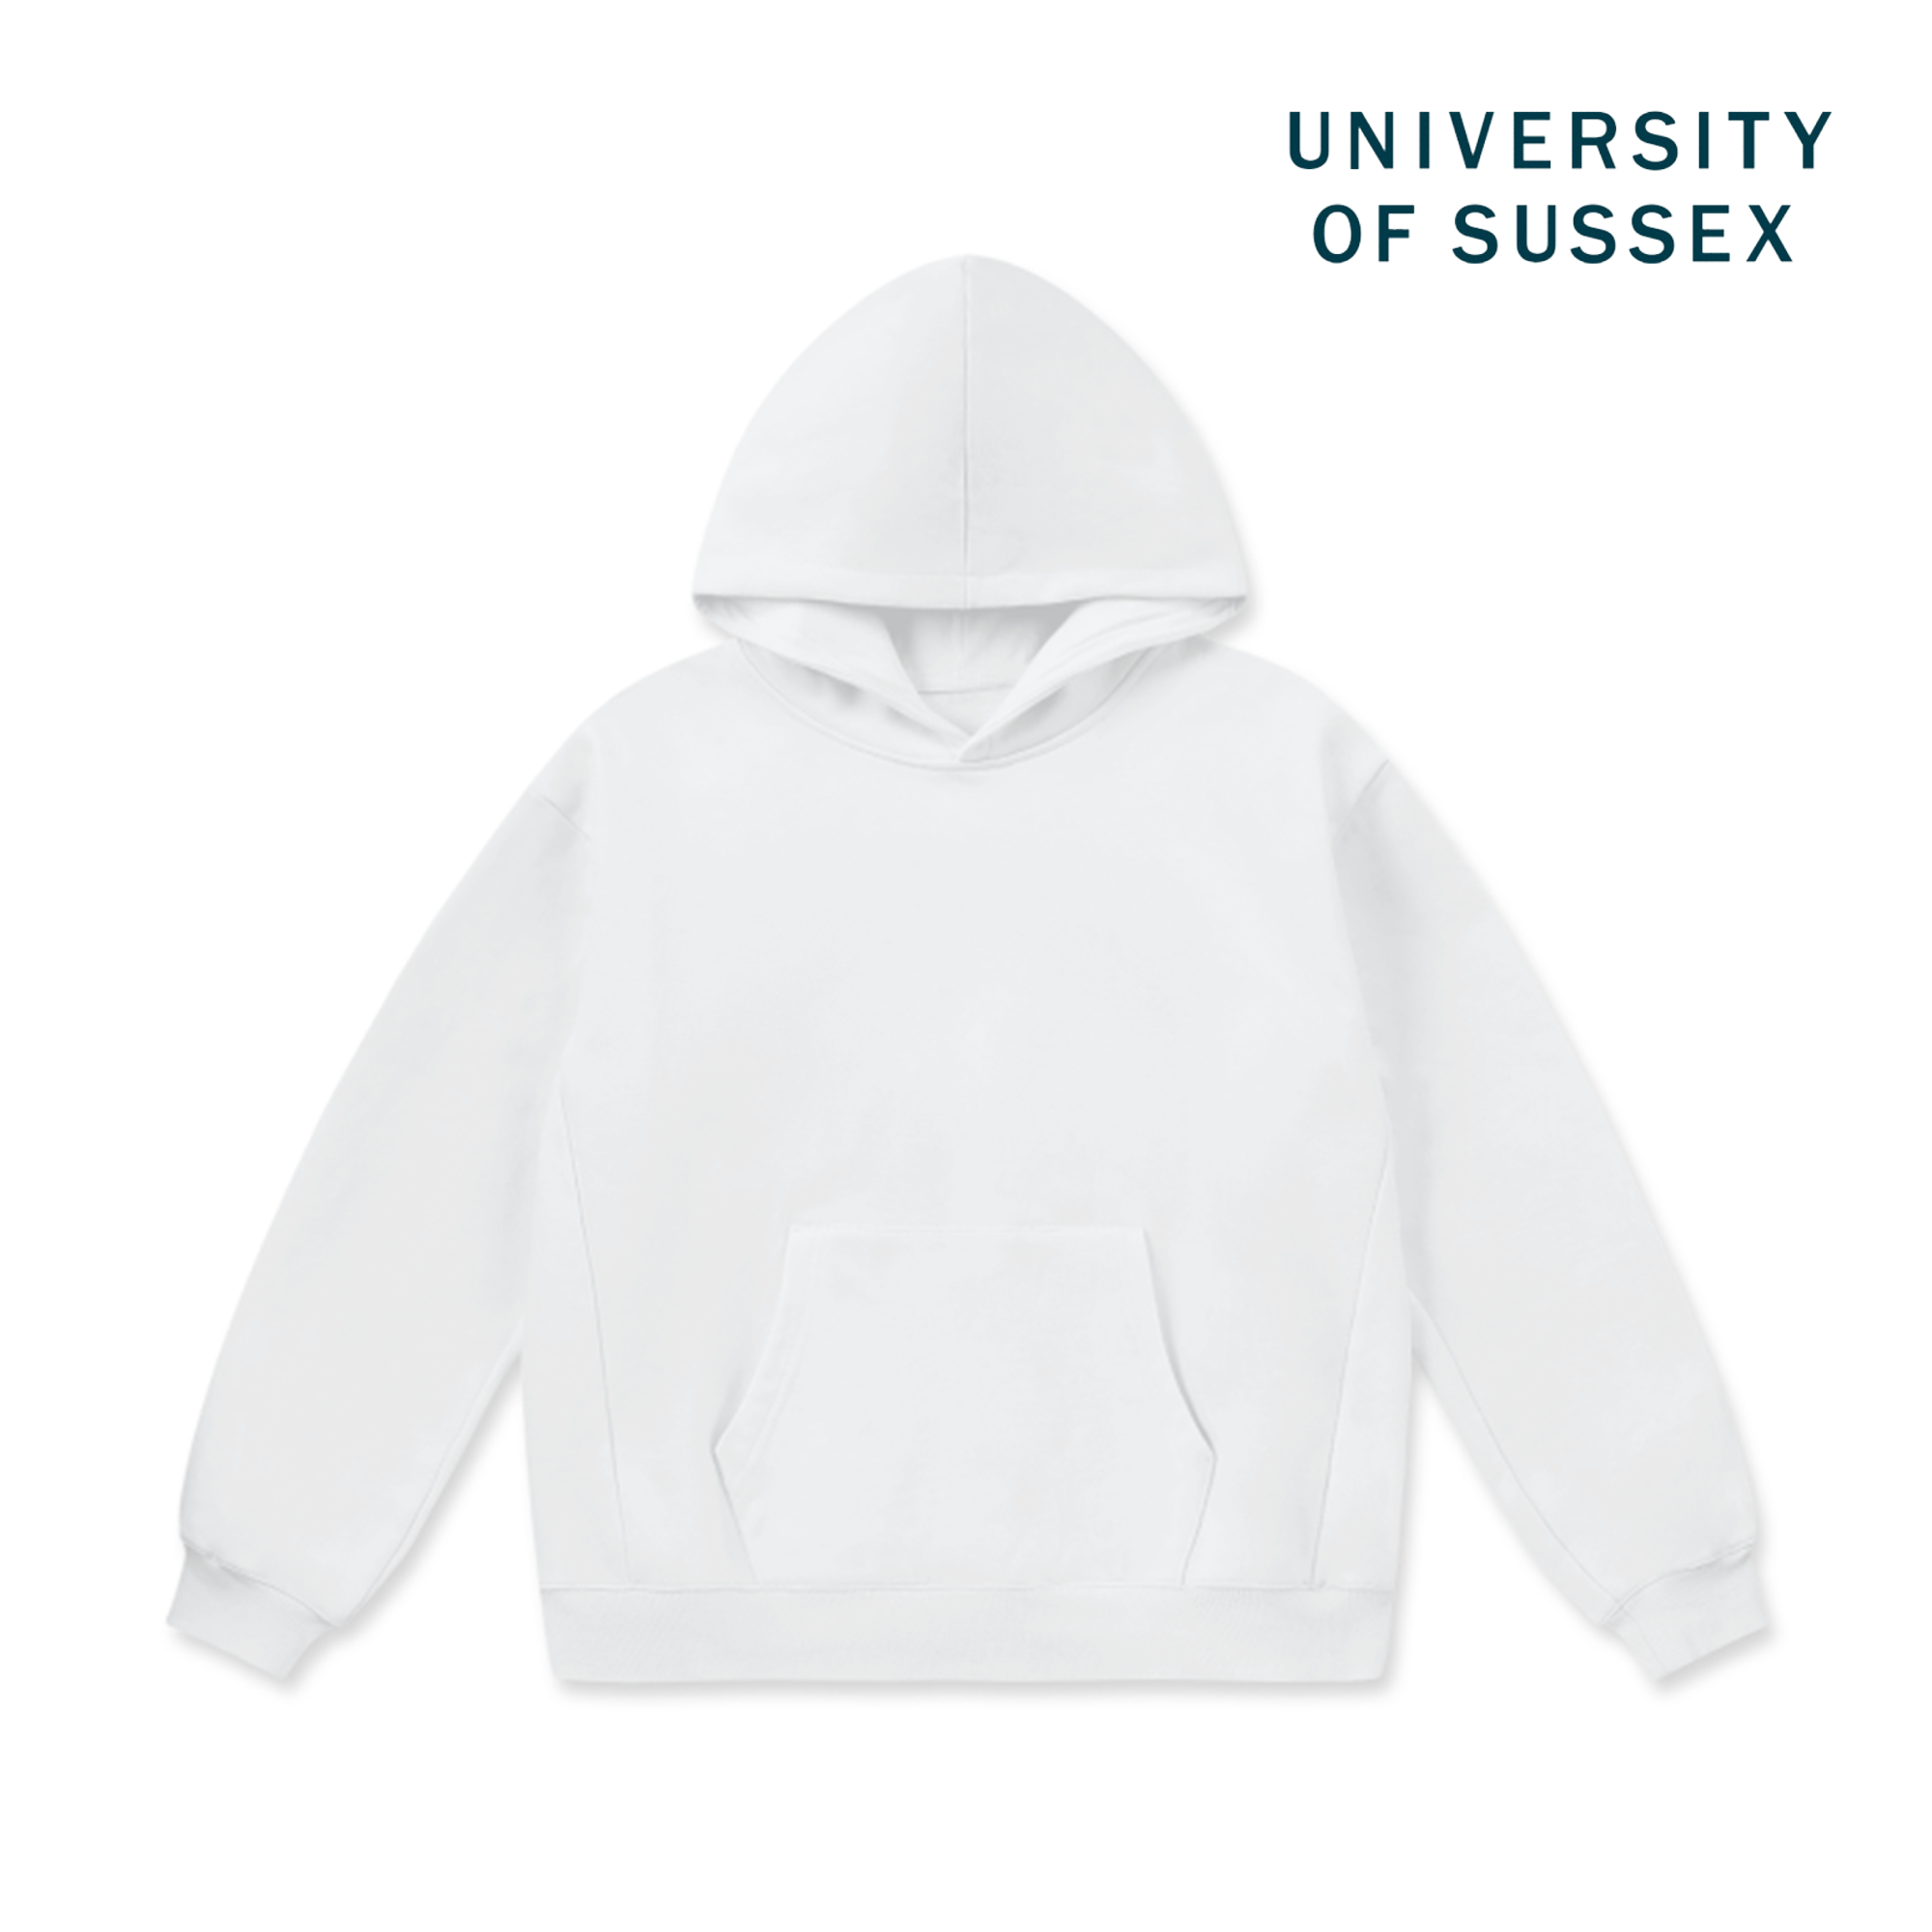 LCC Super Weighted Hoodie - University of Sussex (Modern)